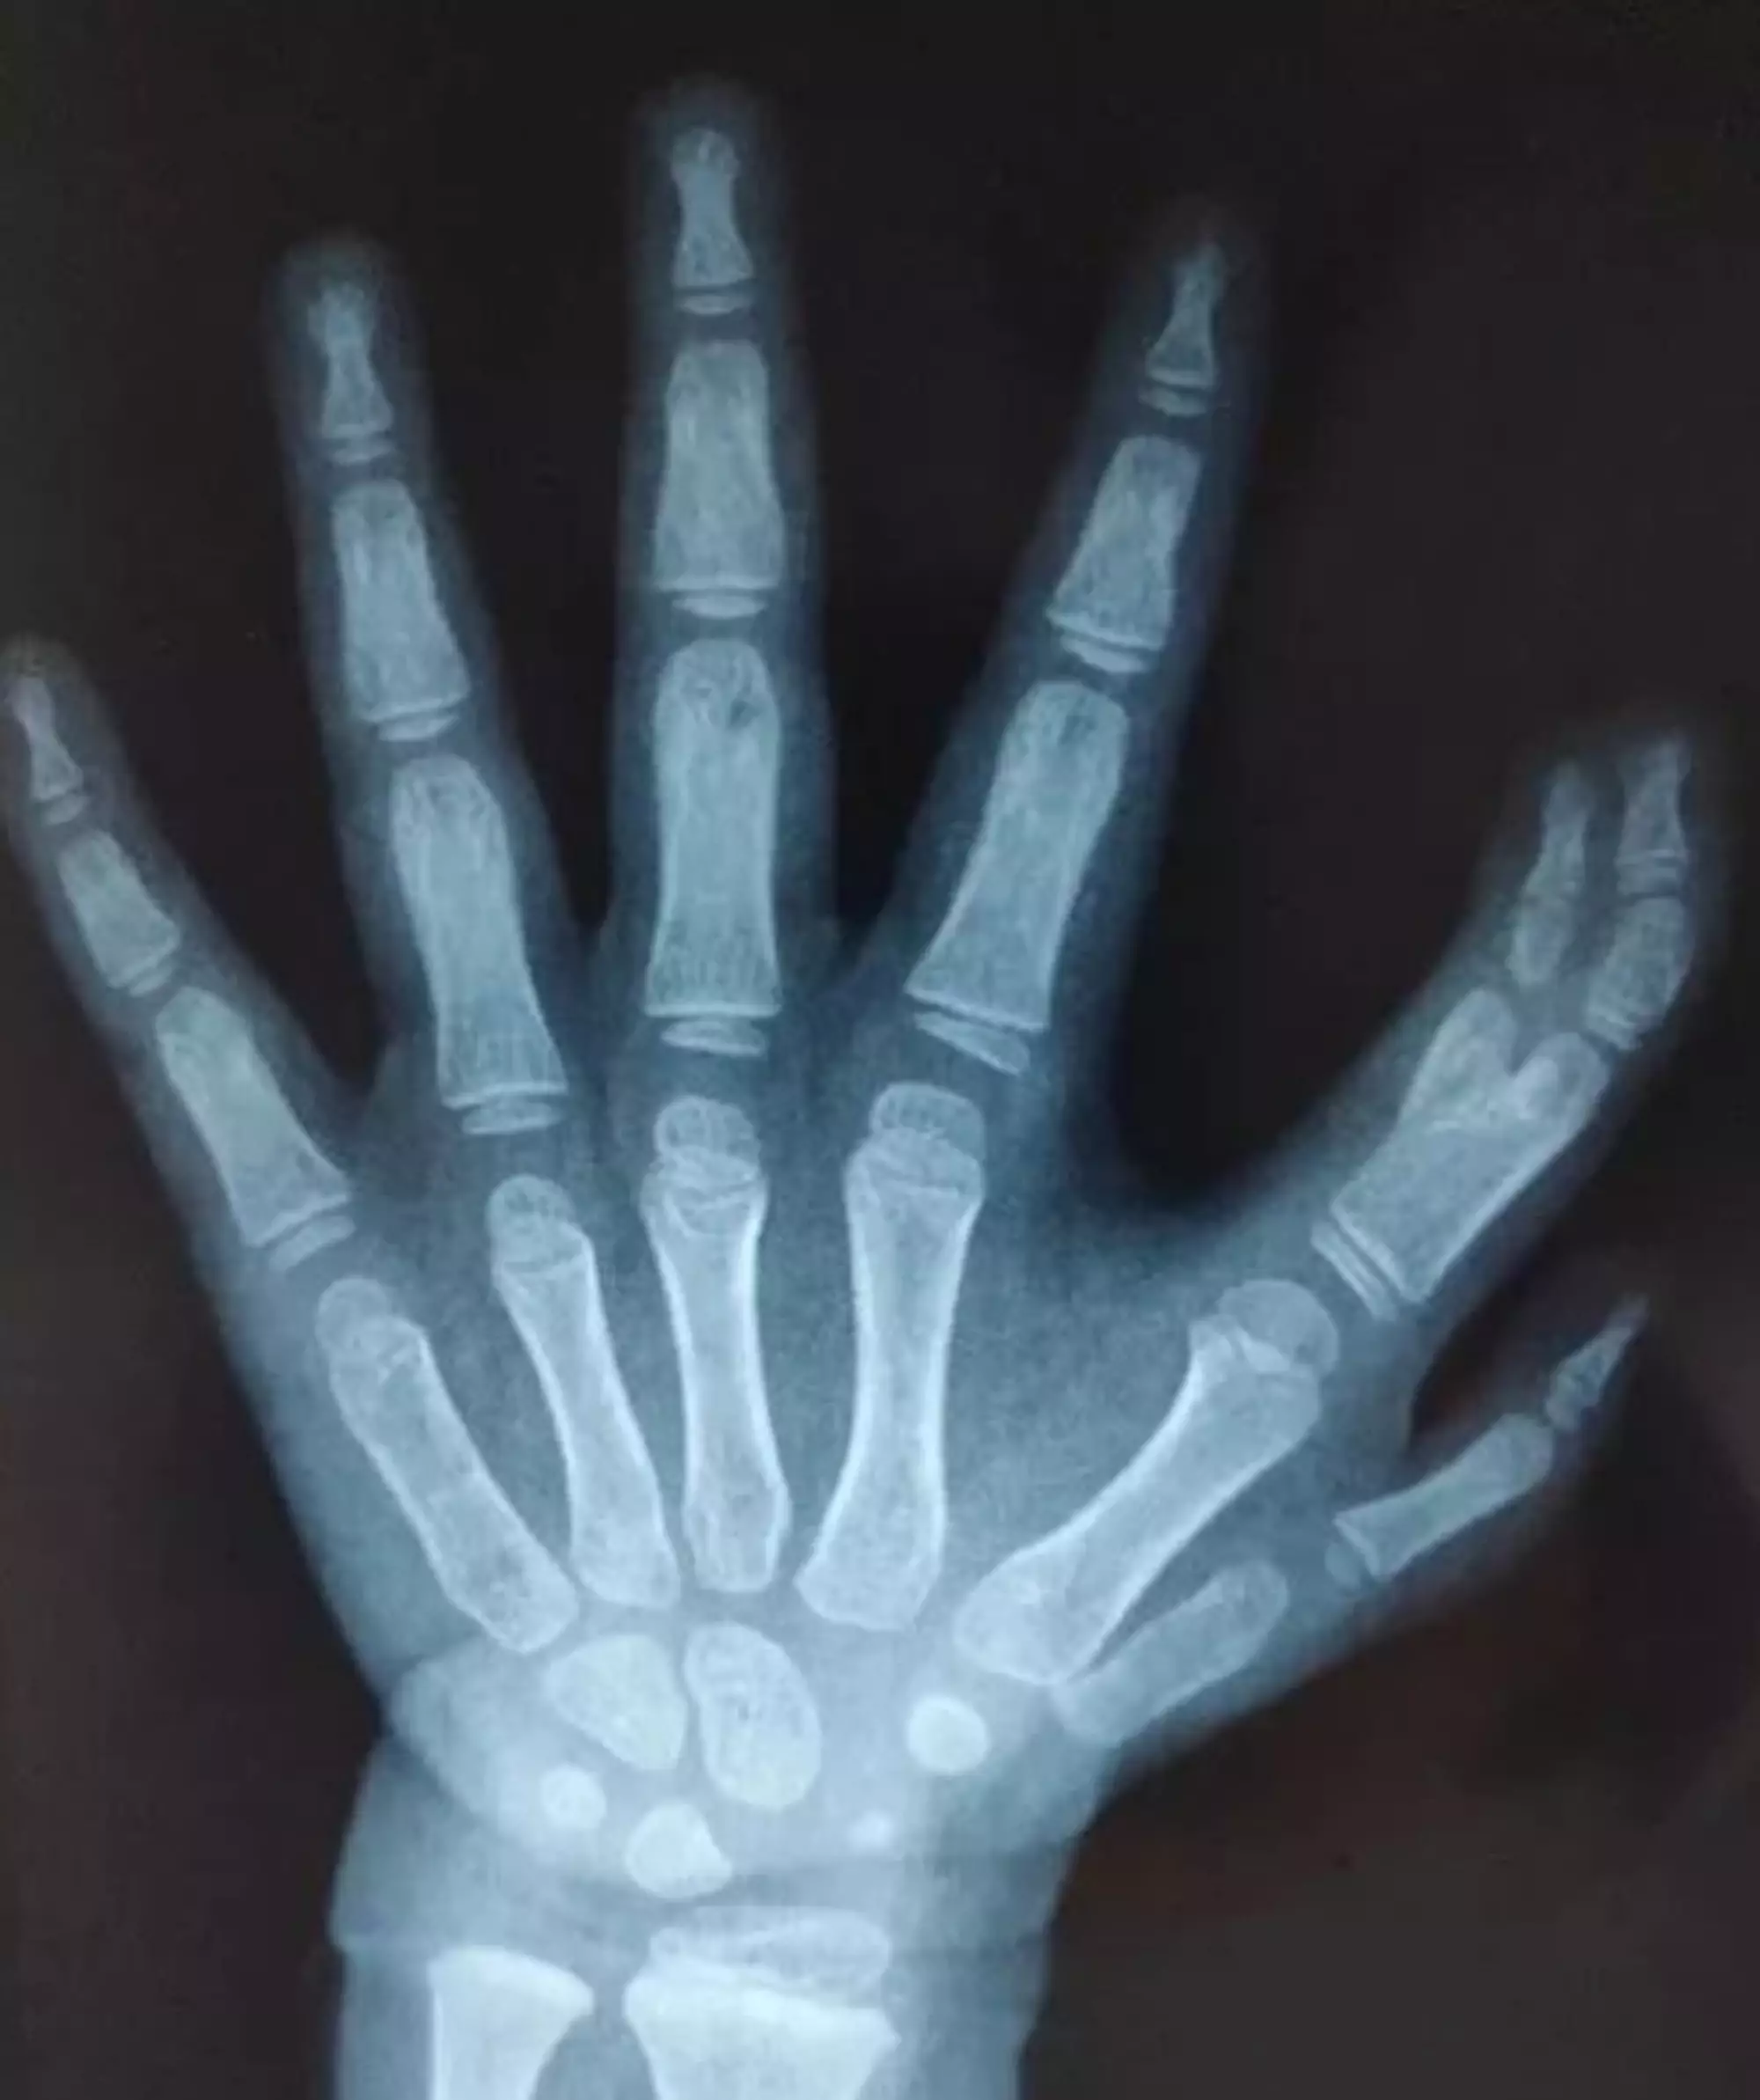 Doctors expect the girl's fingers to develop normally.